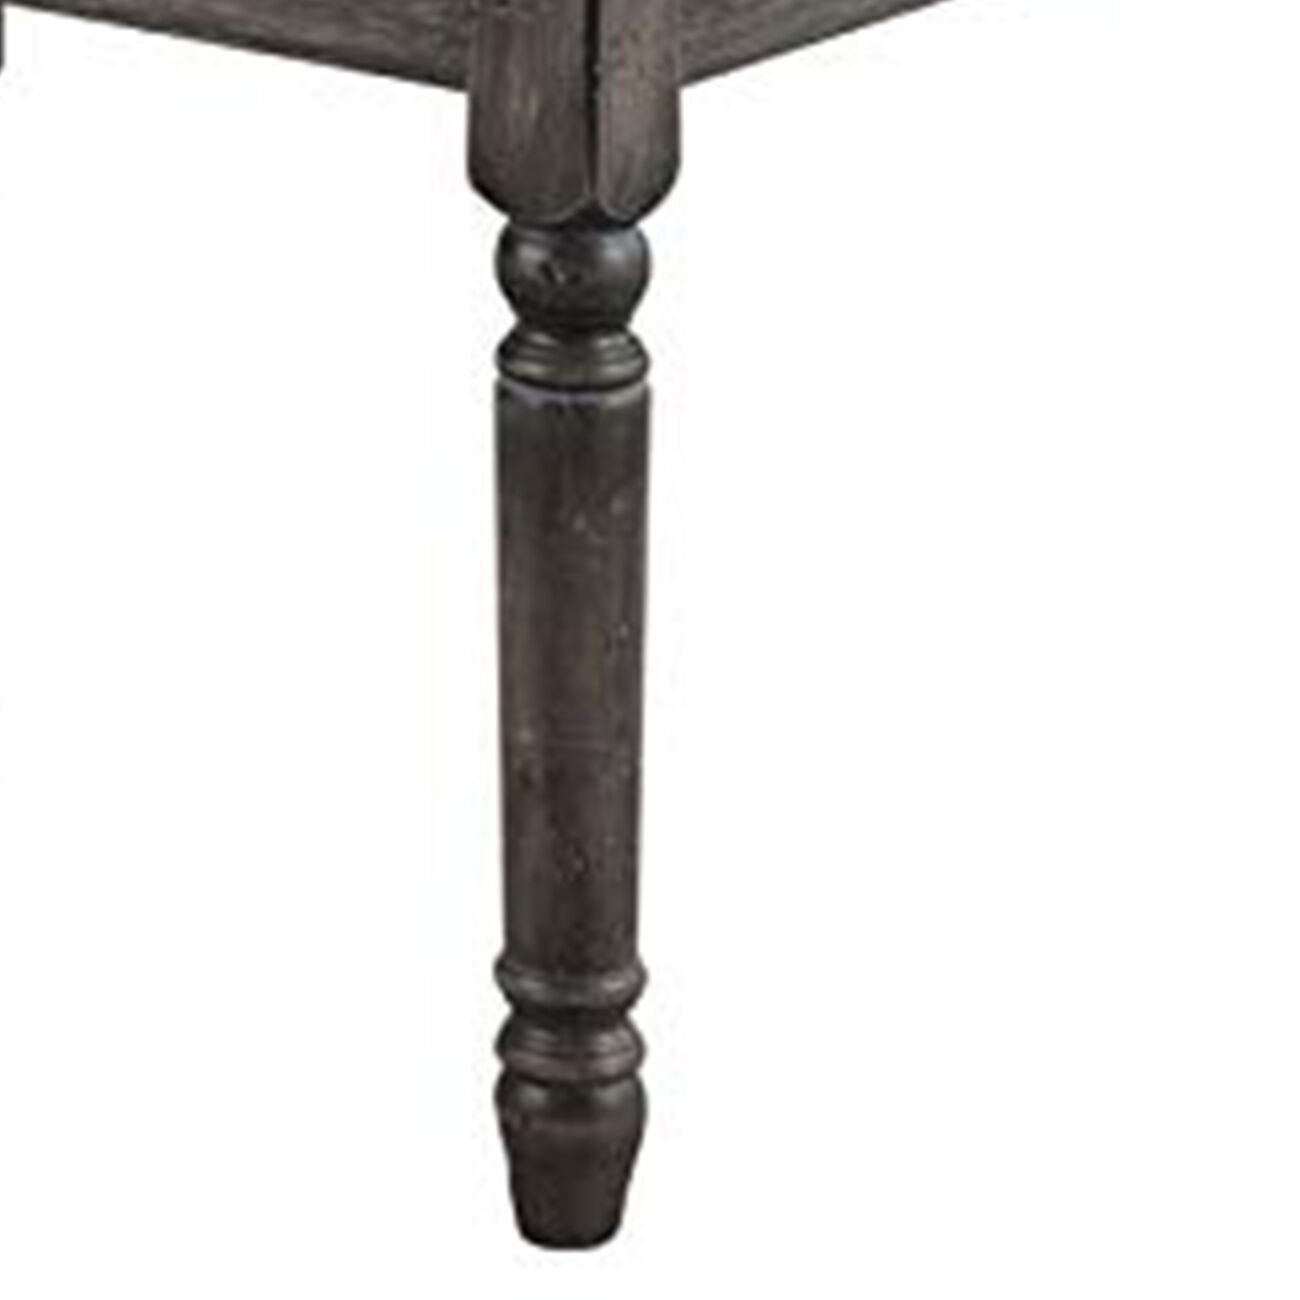 Weathered Lookinhg Dining Table, Gray